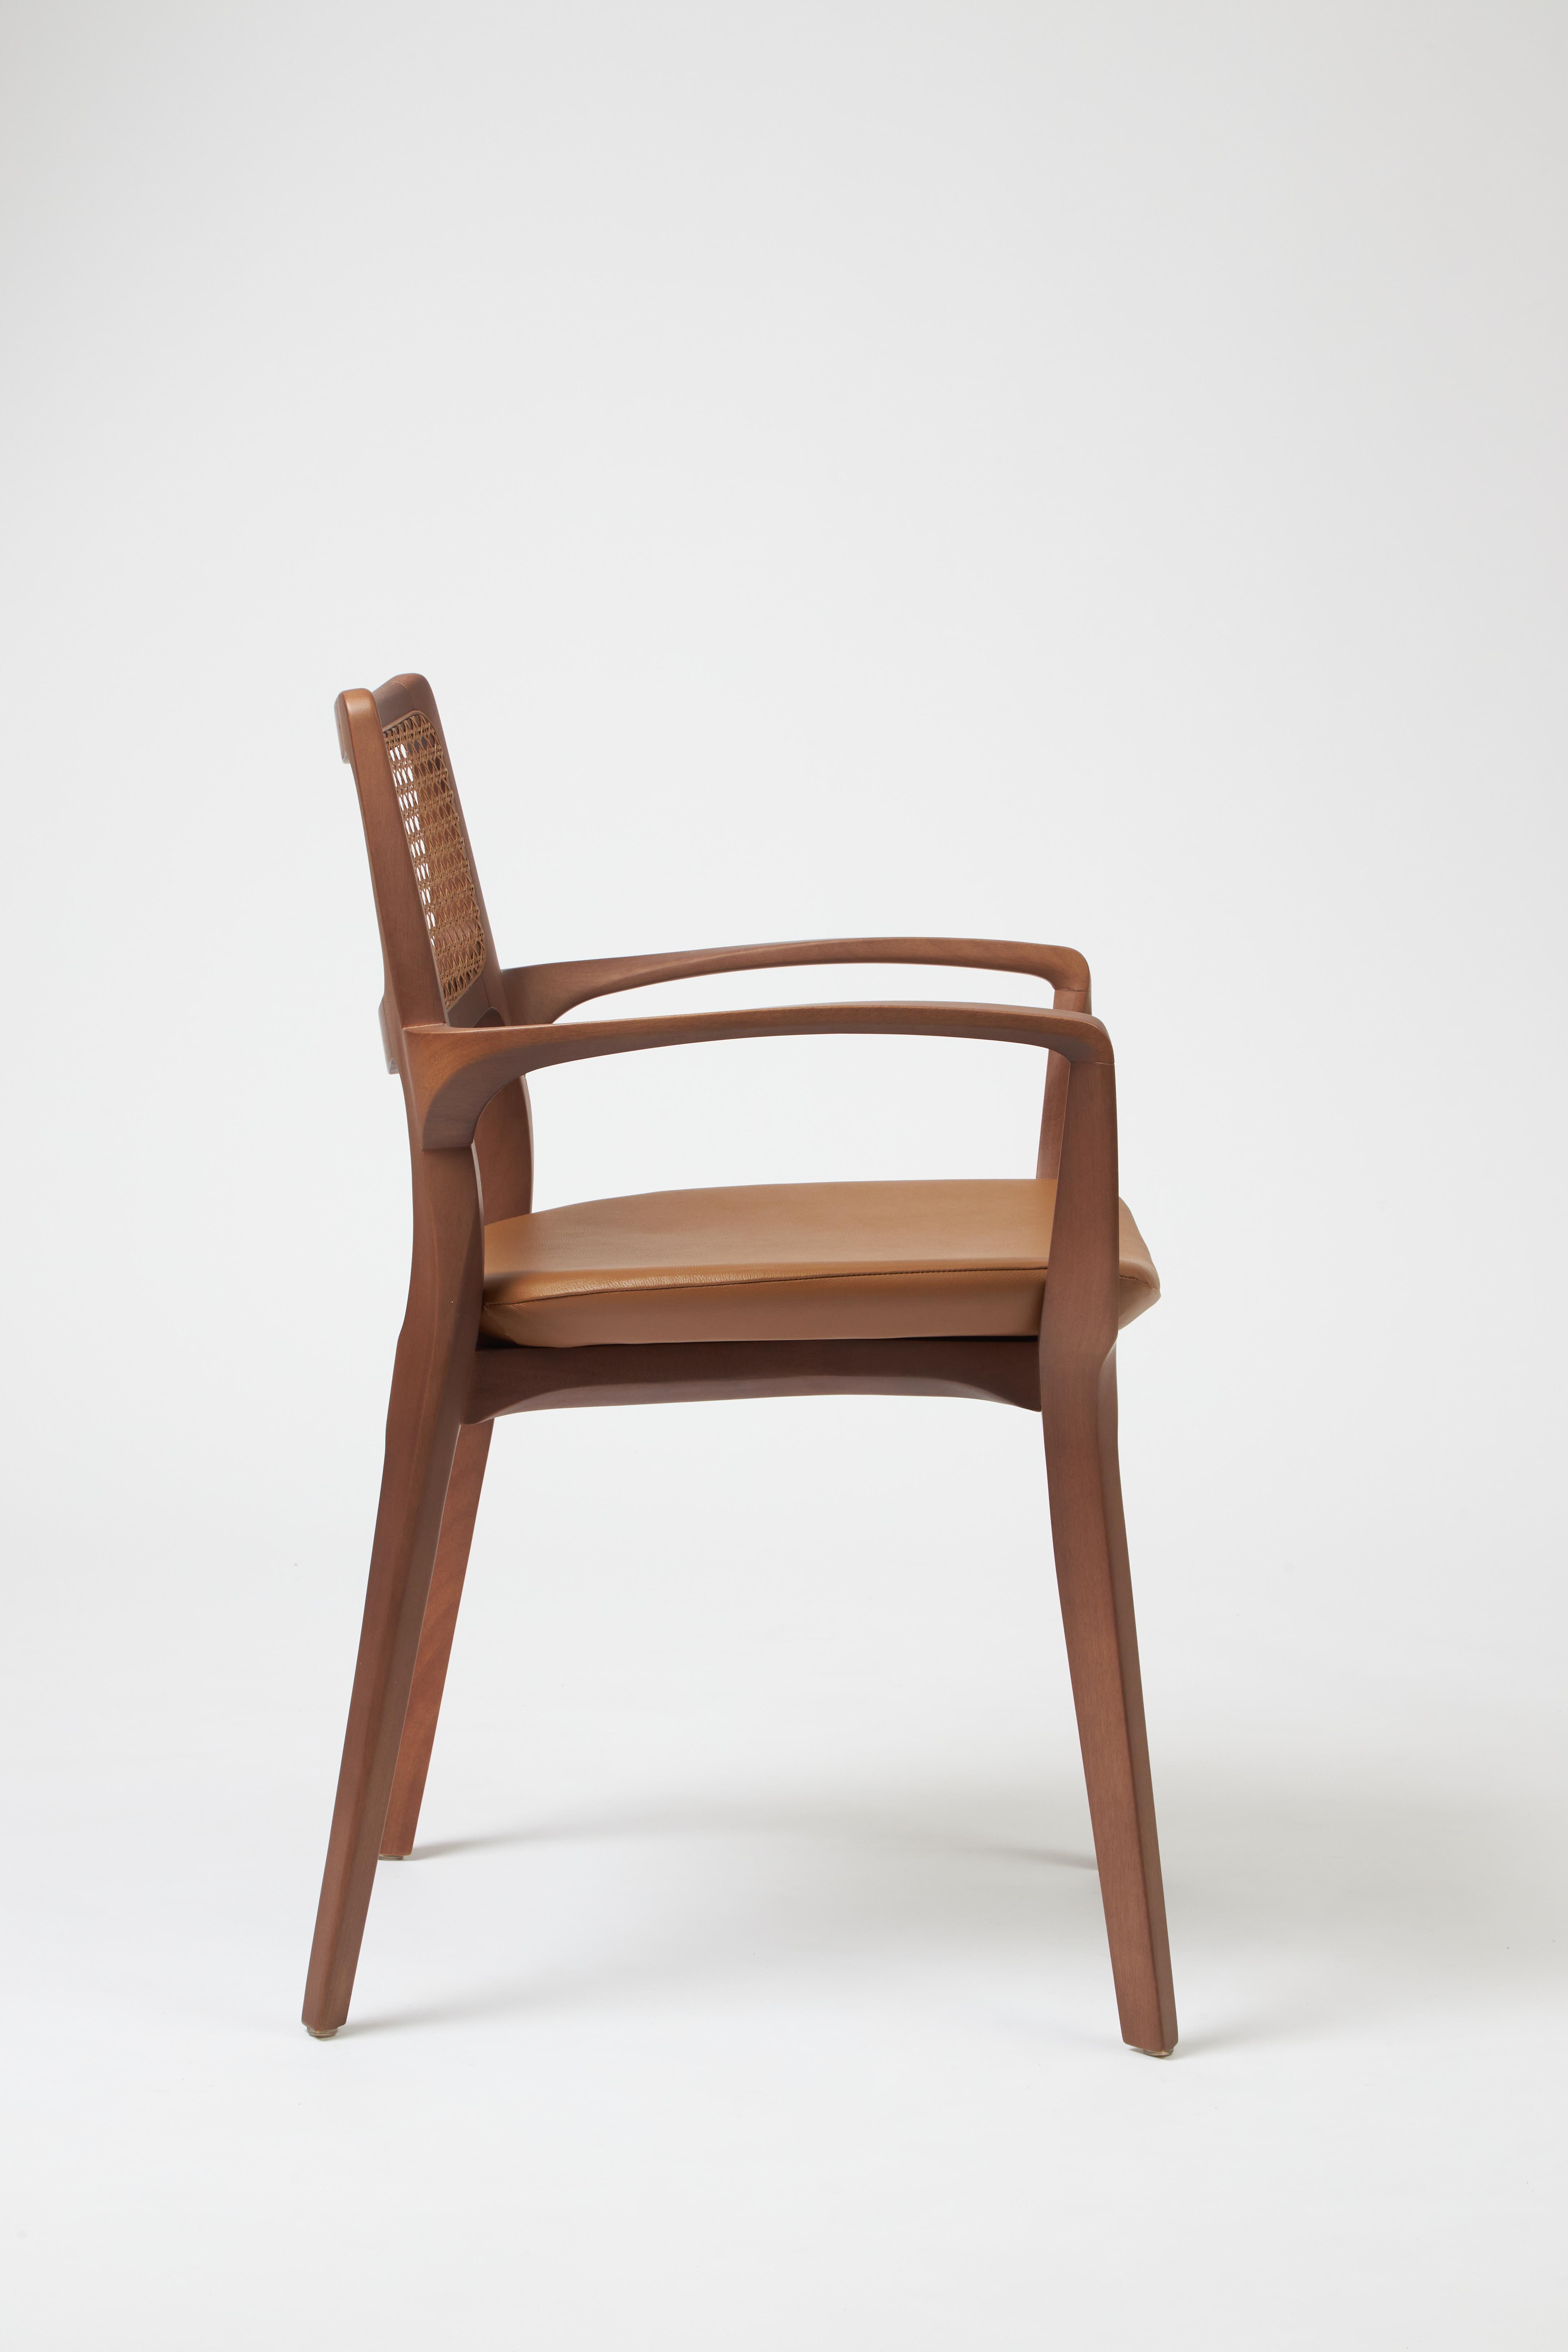 Postmoderne The Moderns Aurora Chair Sculptured in Walnut Finish Arms, leather seating, cane en vente